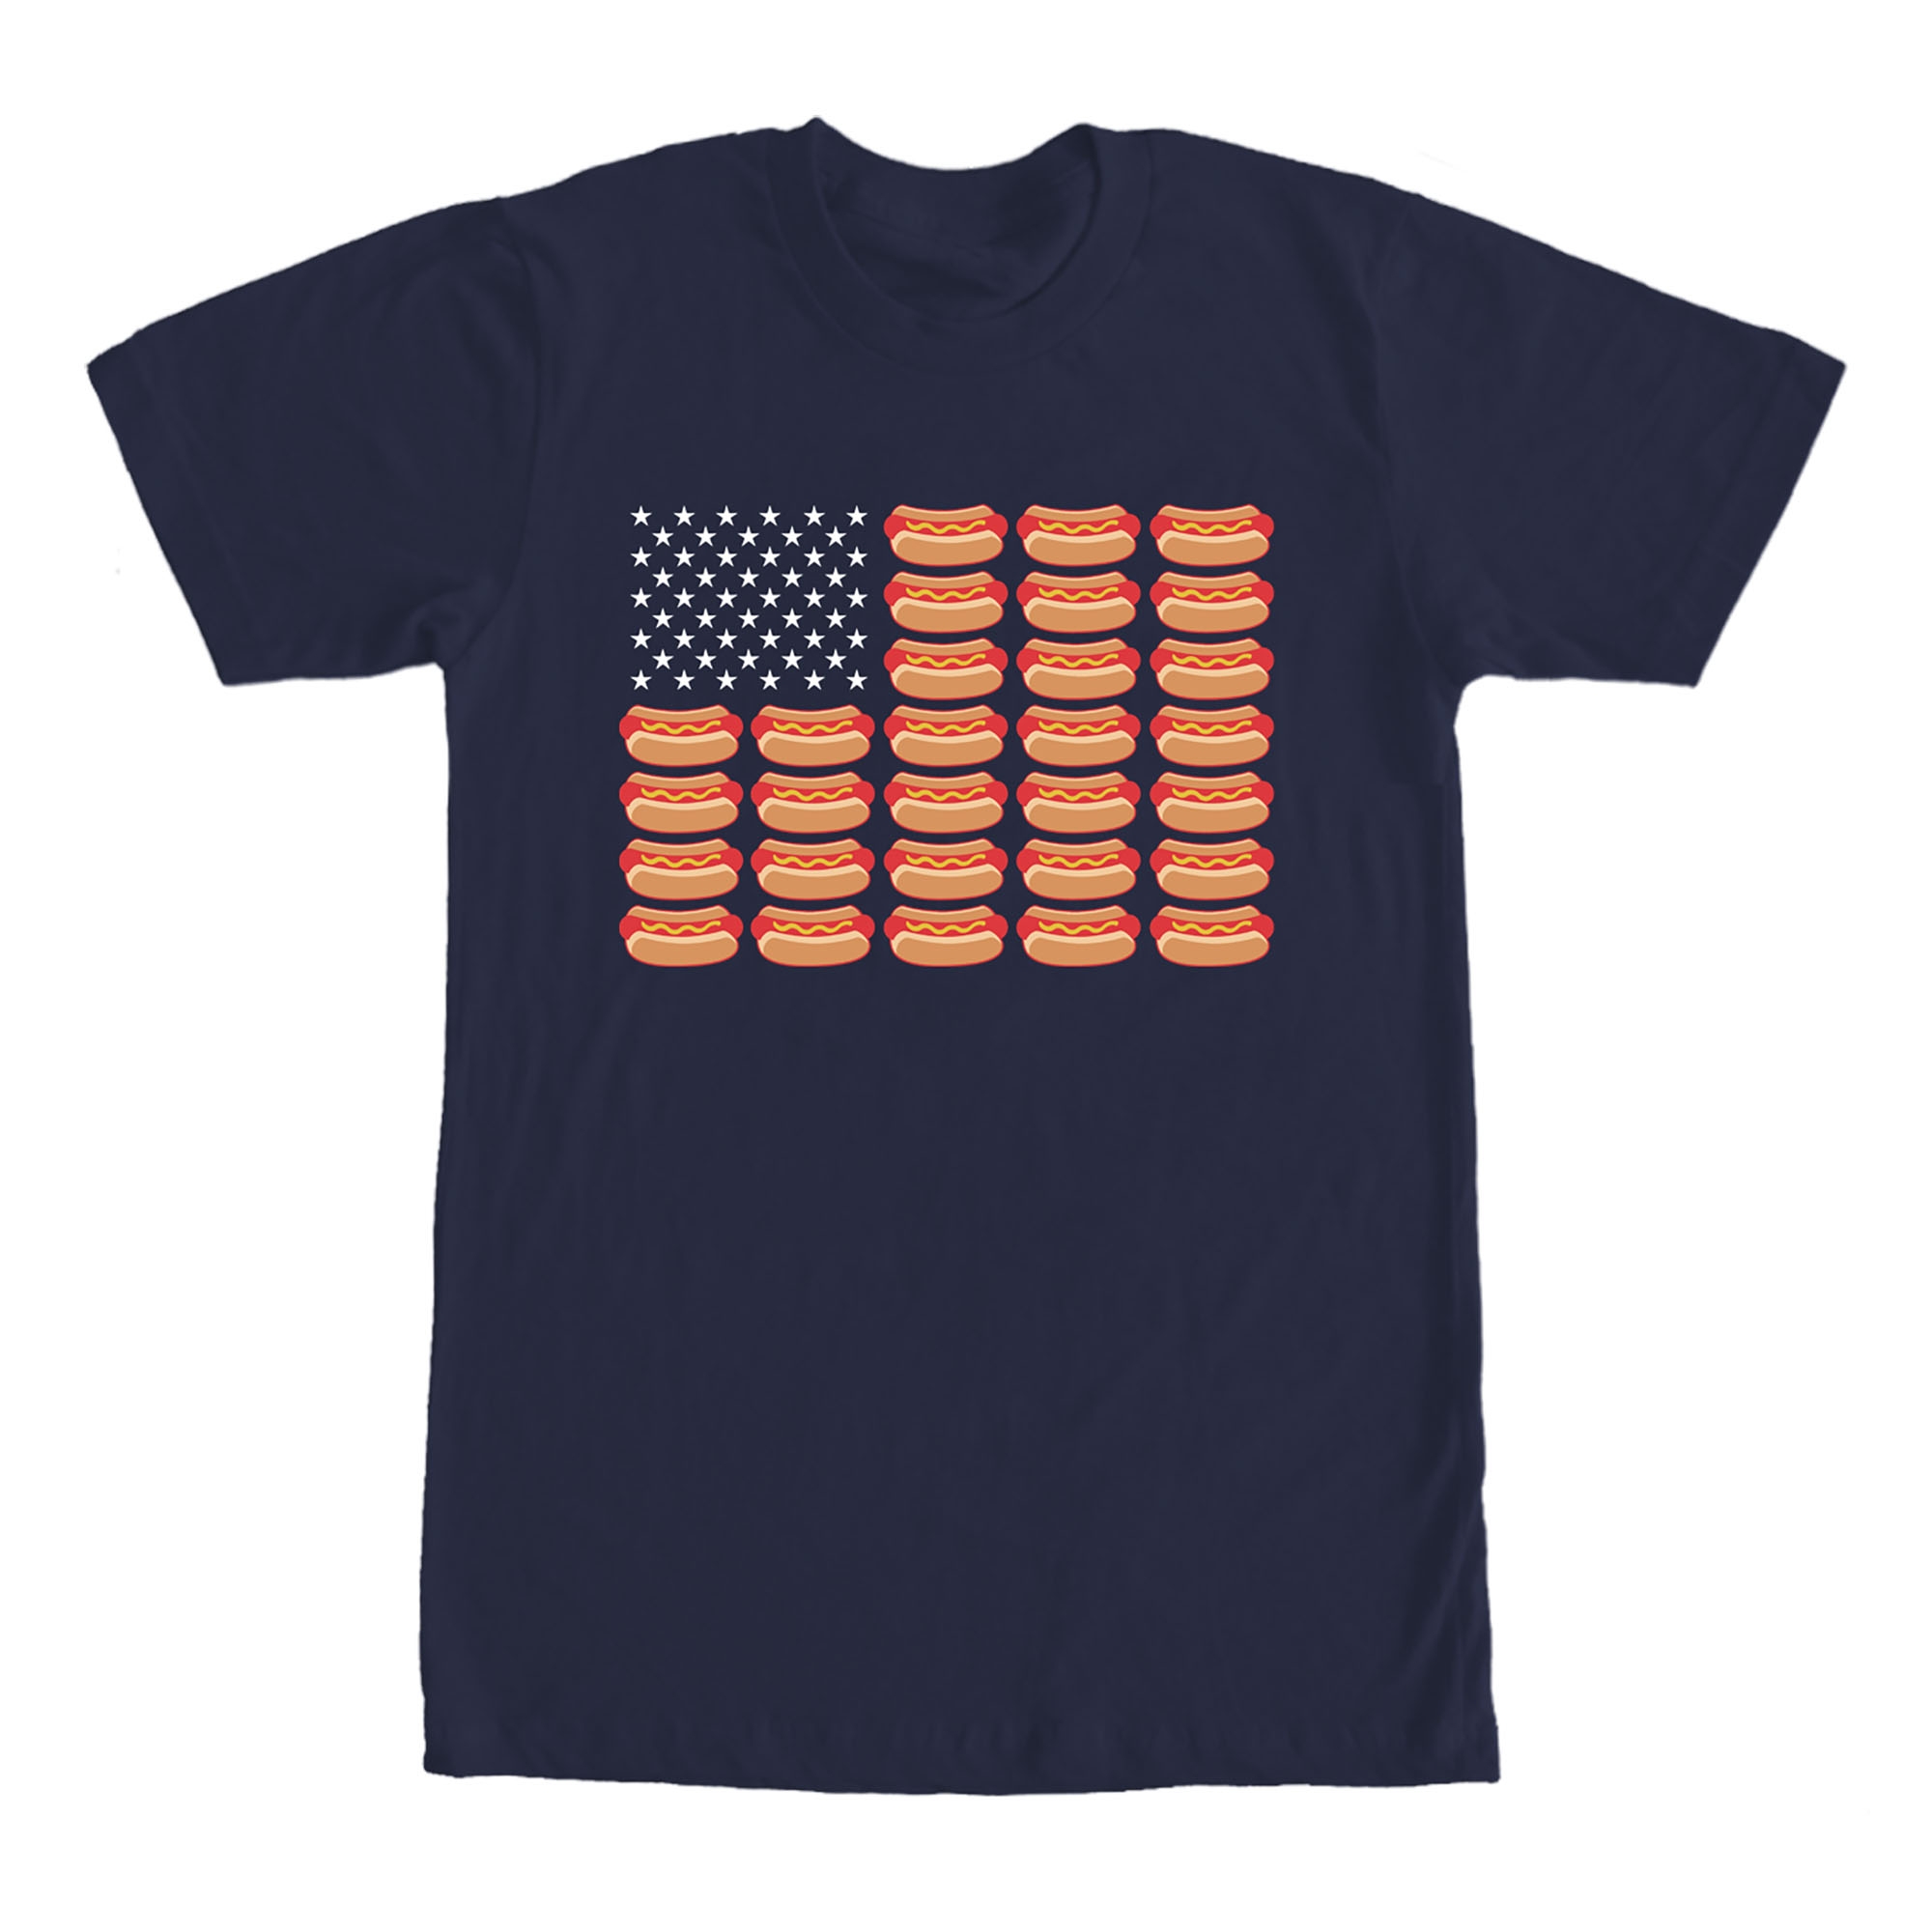 Men's Lost Gods Fourth of July  Hot Dog American Flag  Graphic Tee Navy Blue Medium - image 1 of 4